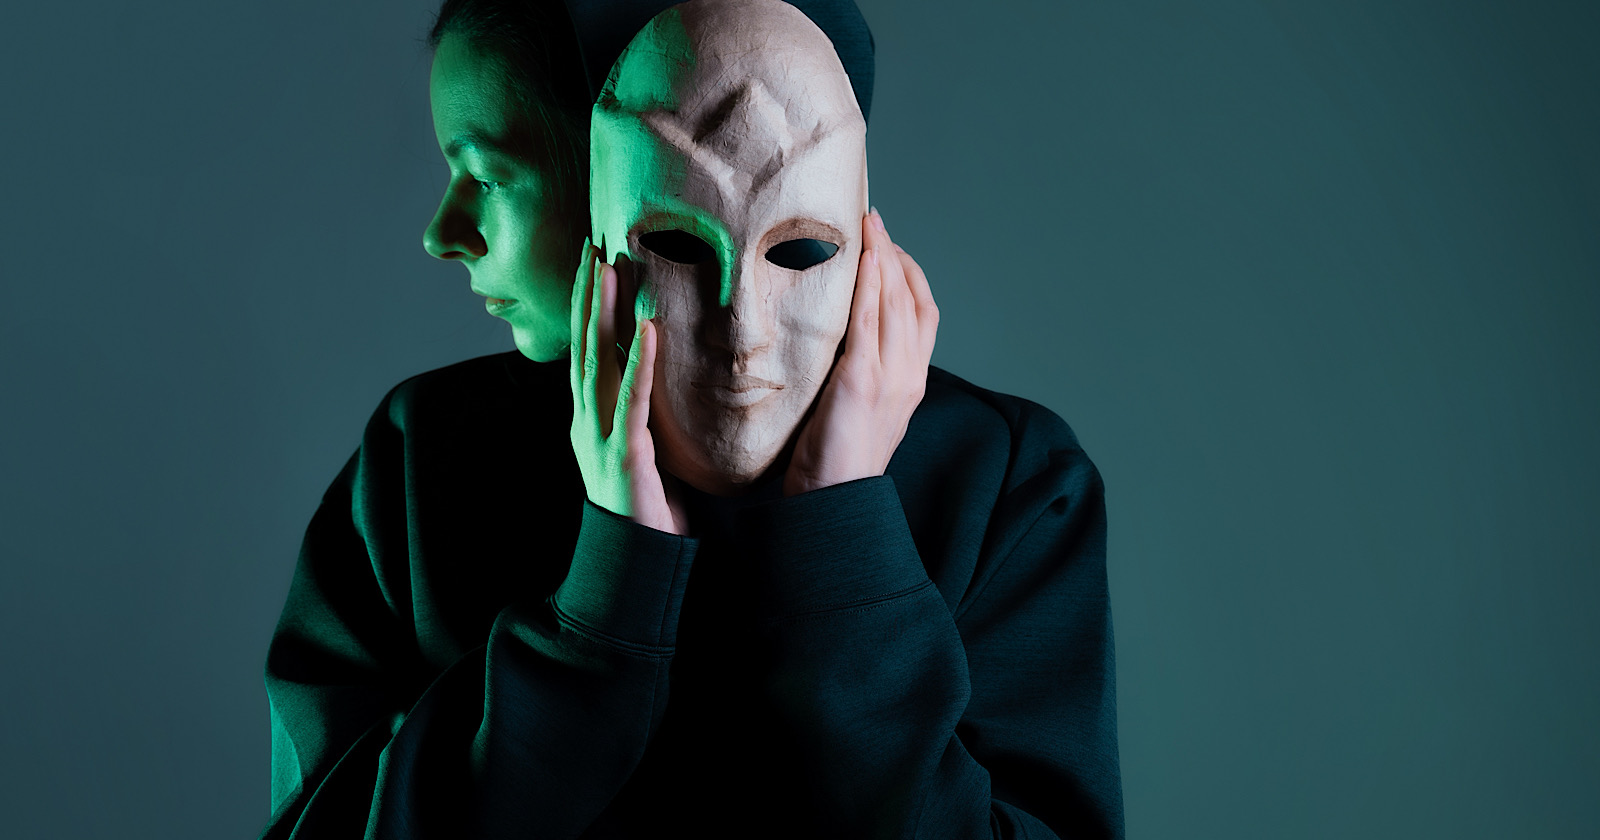 Hiding behind a mask, a young woman in a dark hoodie hides her face with a mask, privacy on the Internet, the concept of information security